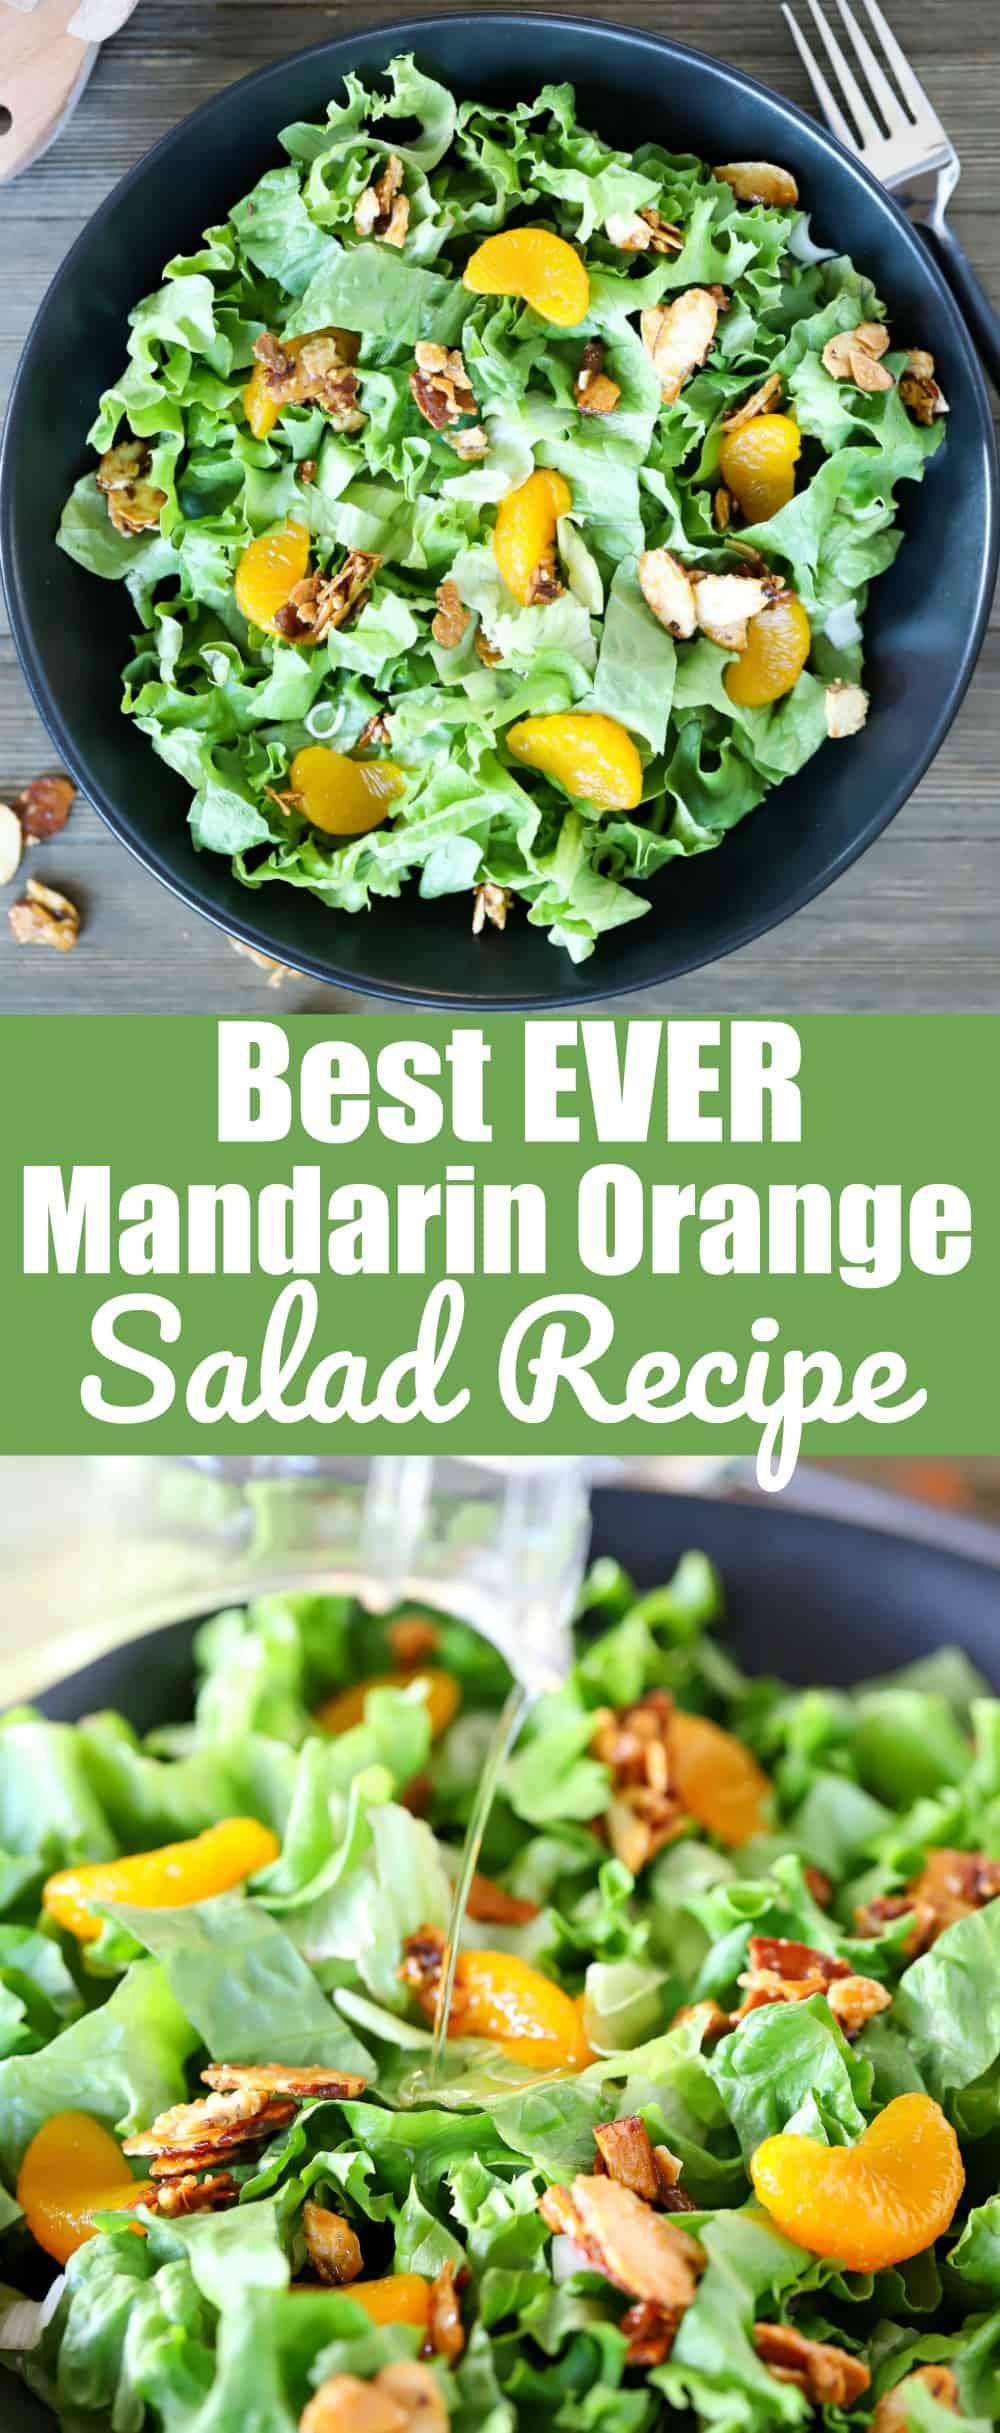 When I'm asked to bring a green salad to a party, I always bring this Mandarin Orange Salad! I always get asked for the recipe. The thing that's different about this salad is the homemade DRESSING! It is just too delicious and so easy to make! 
#salad #oranges #healthy #homemade #bestever #mandarinoranges #easy #yummyrecipe via @jennikolaus